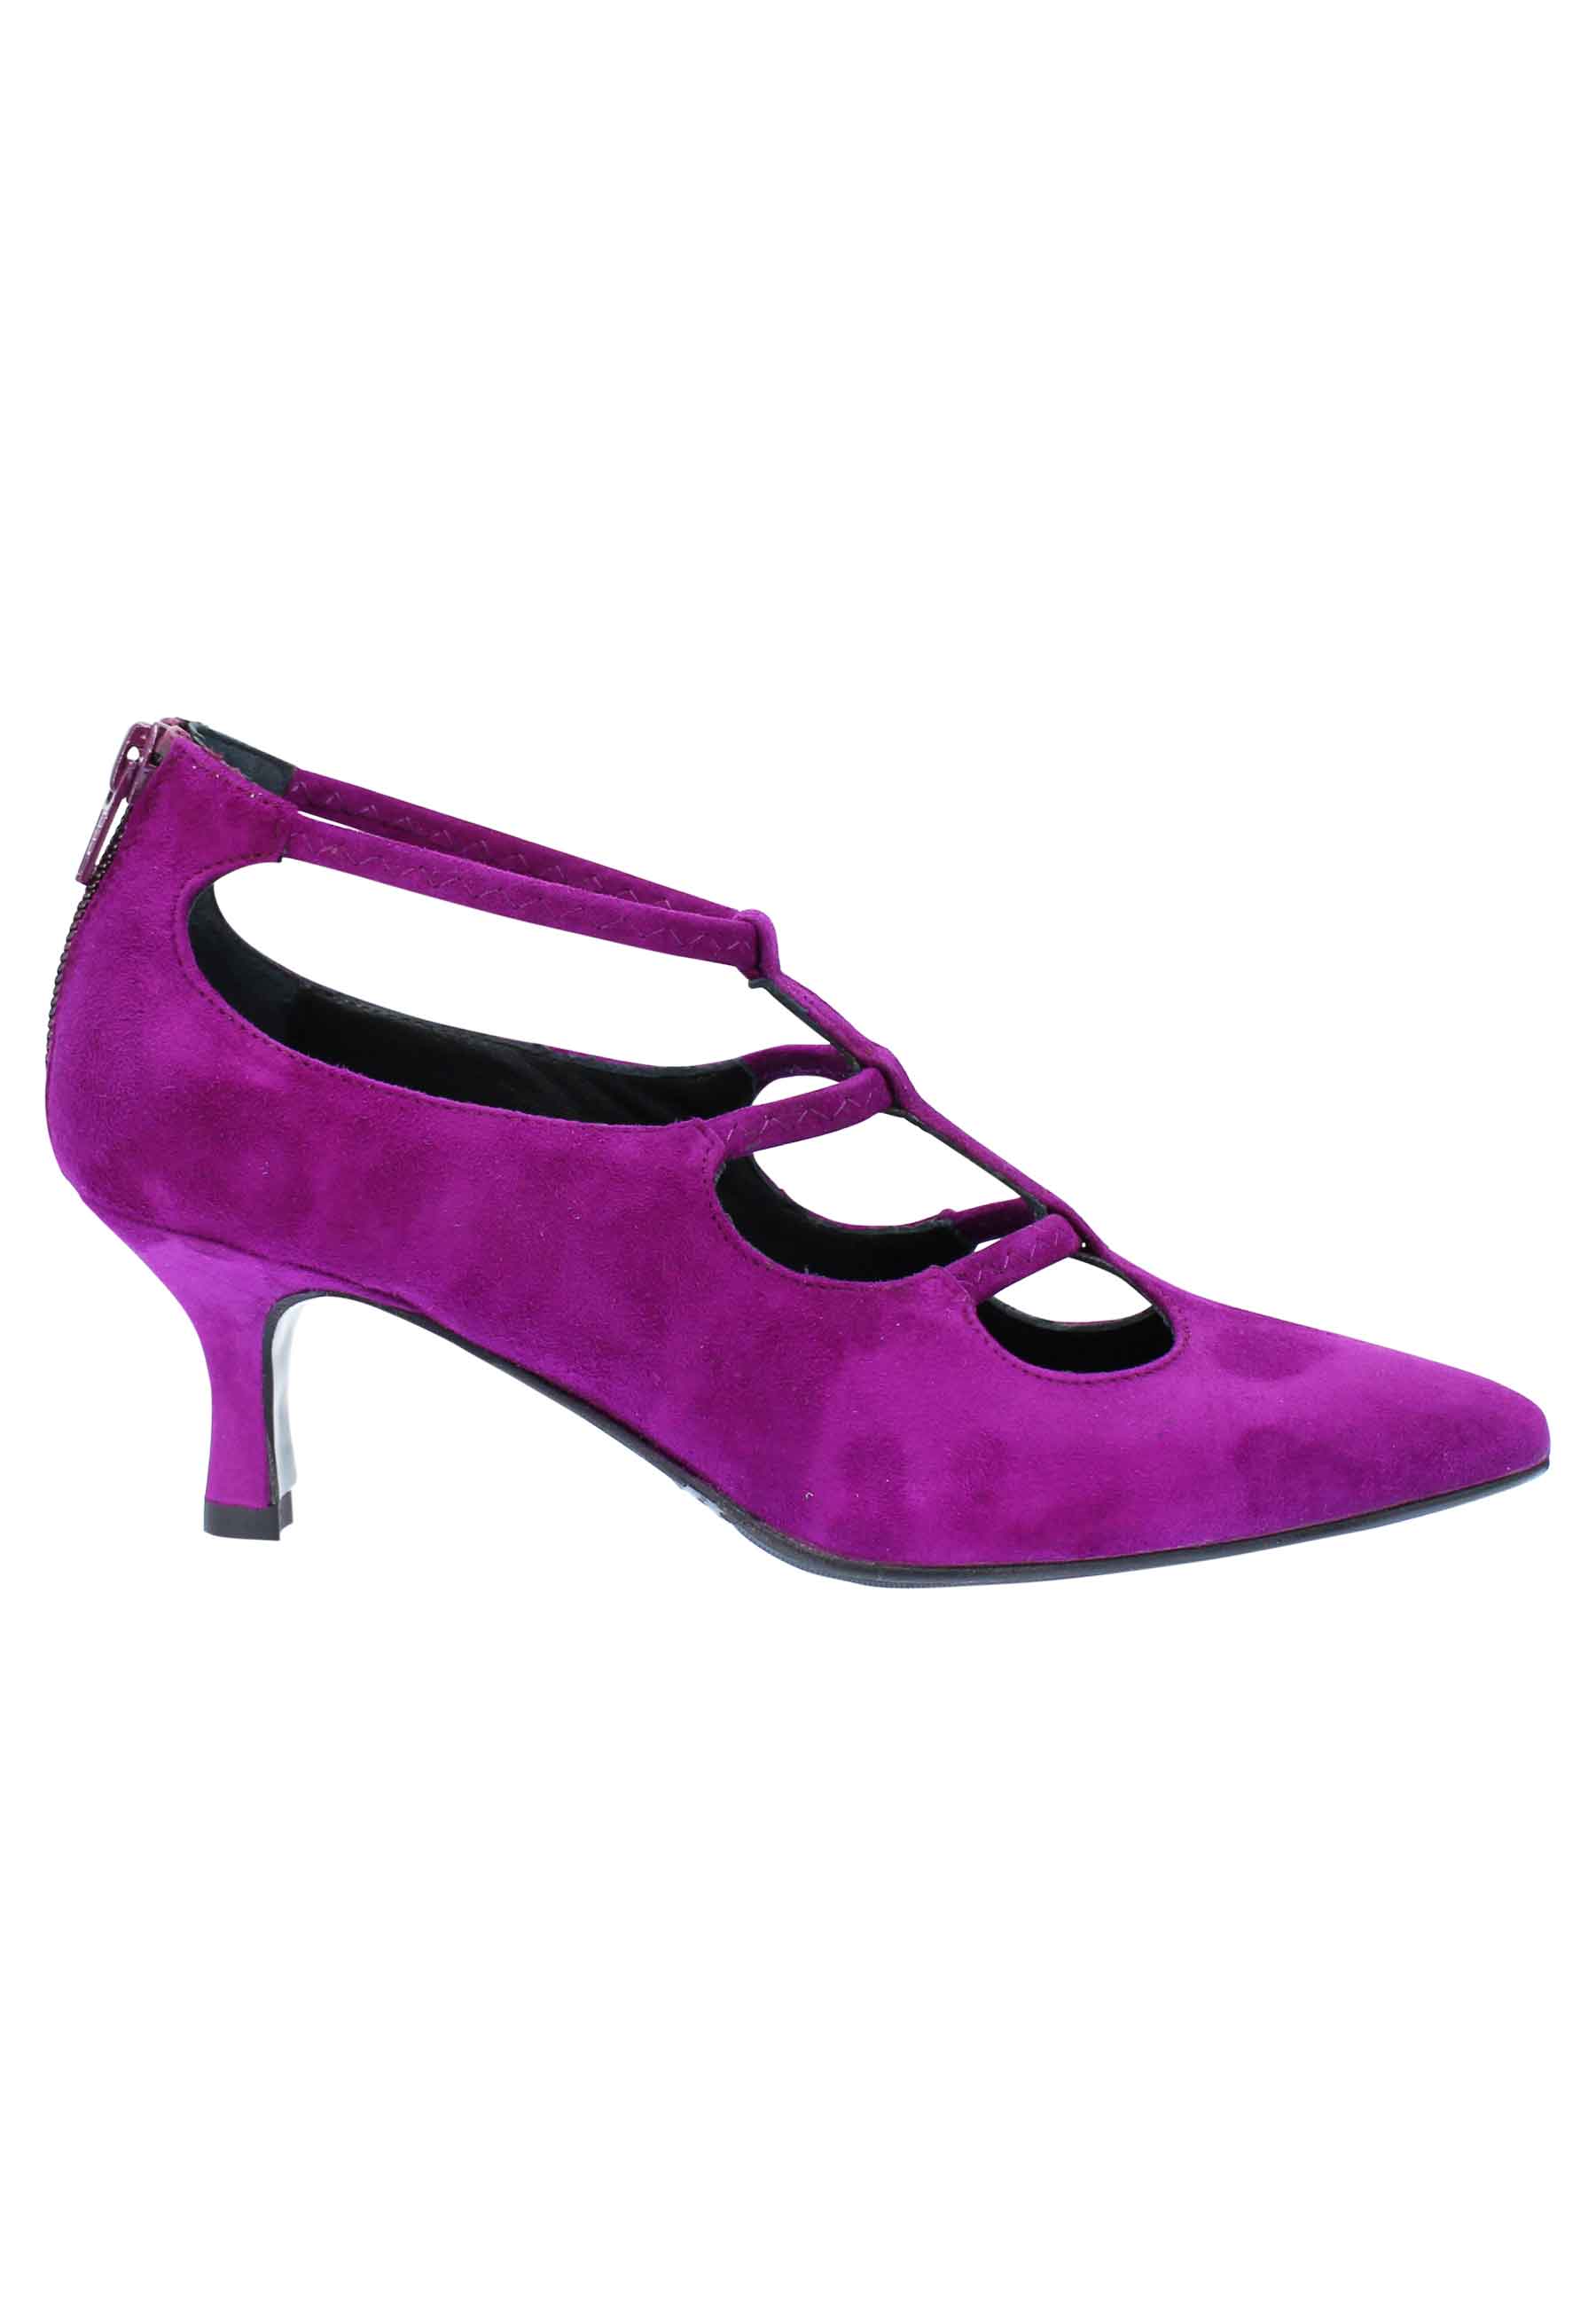 Women's pumps in purple suede with low heel straps and pointed toe